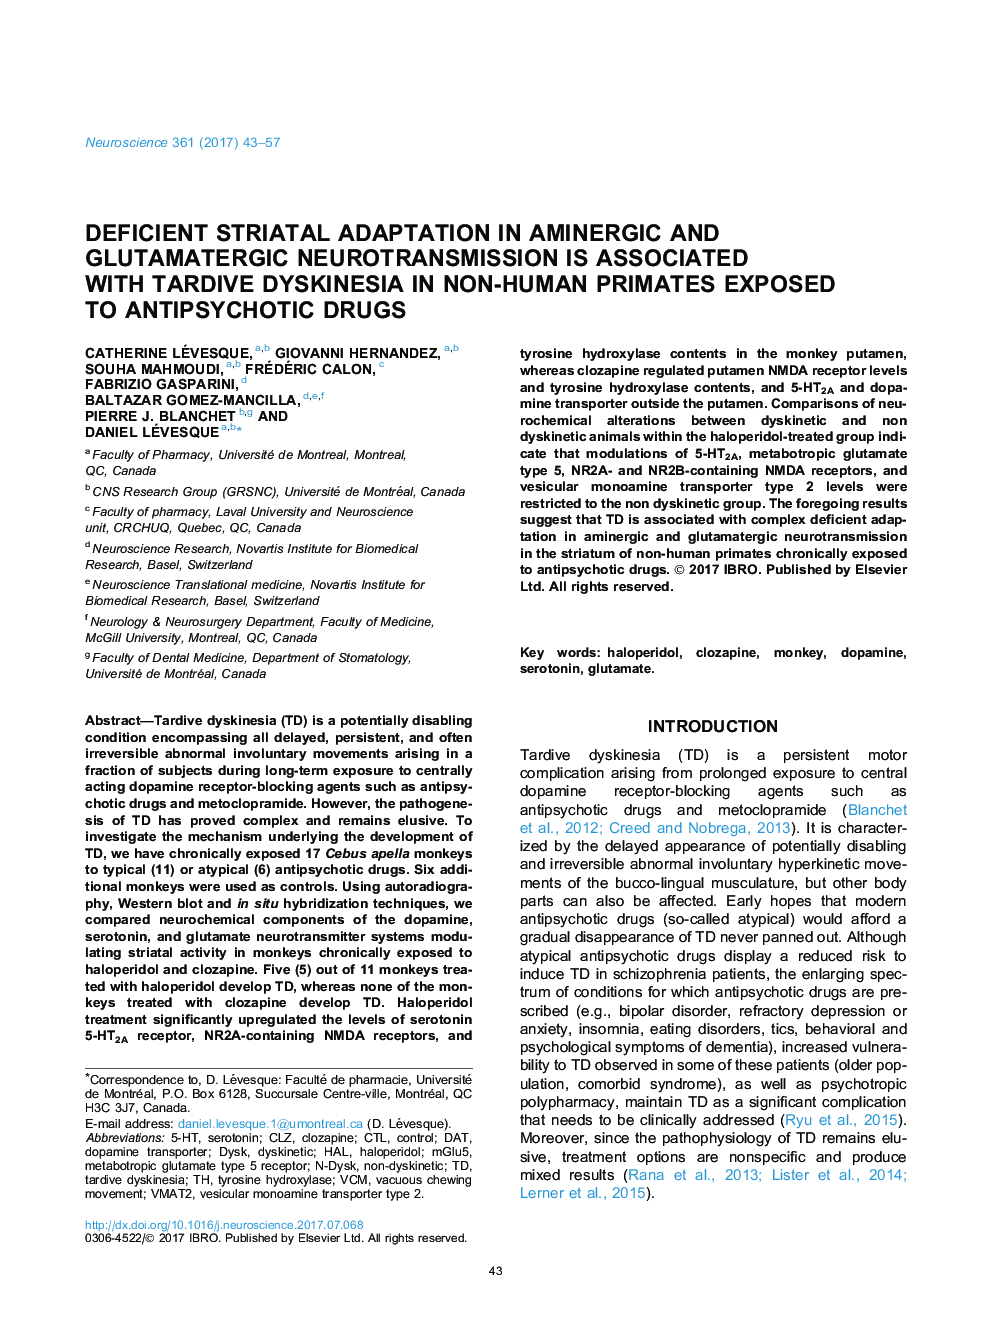 Deficient striatal adaptation in aminergic and glutamatergic neurotransmission is associated with tardive dyskinesia in non-human primates exposed to antipsychotic drugs